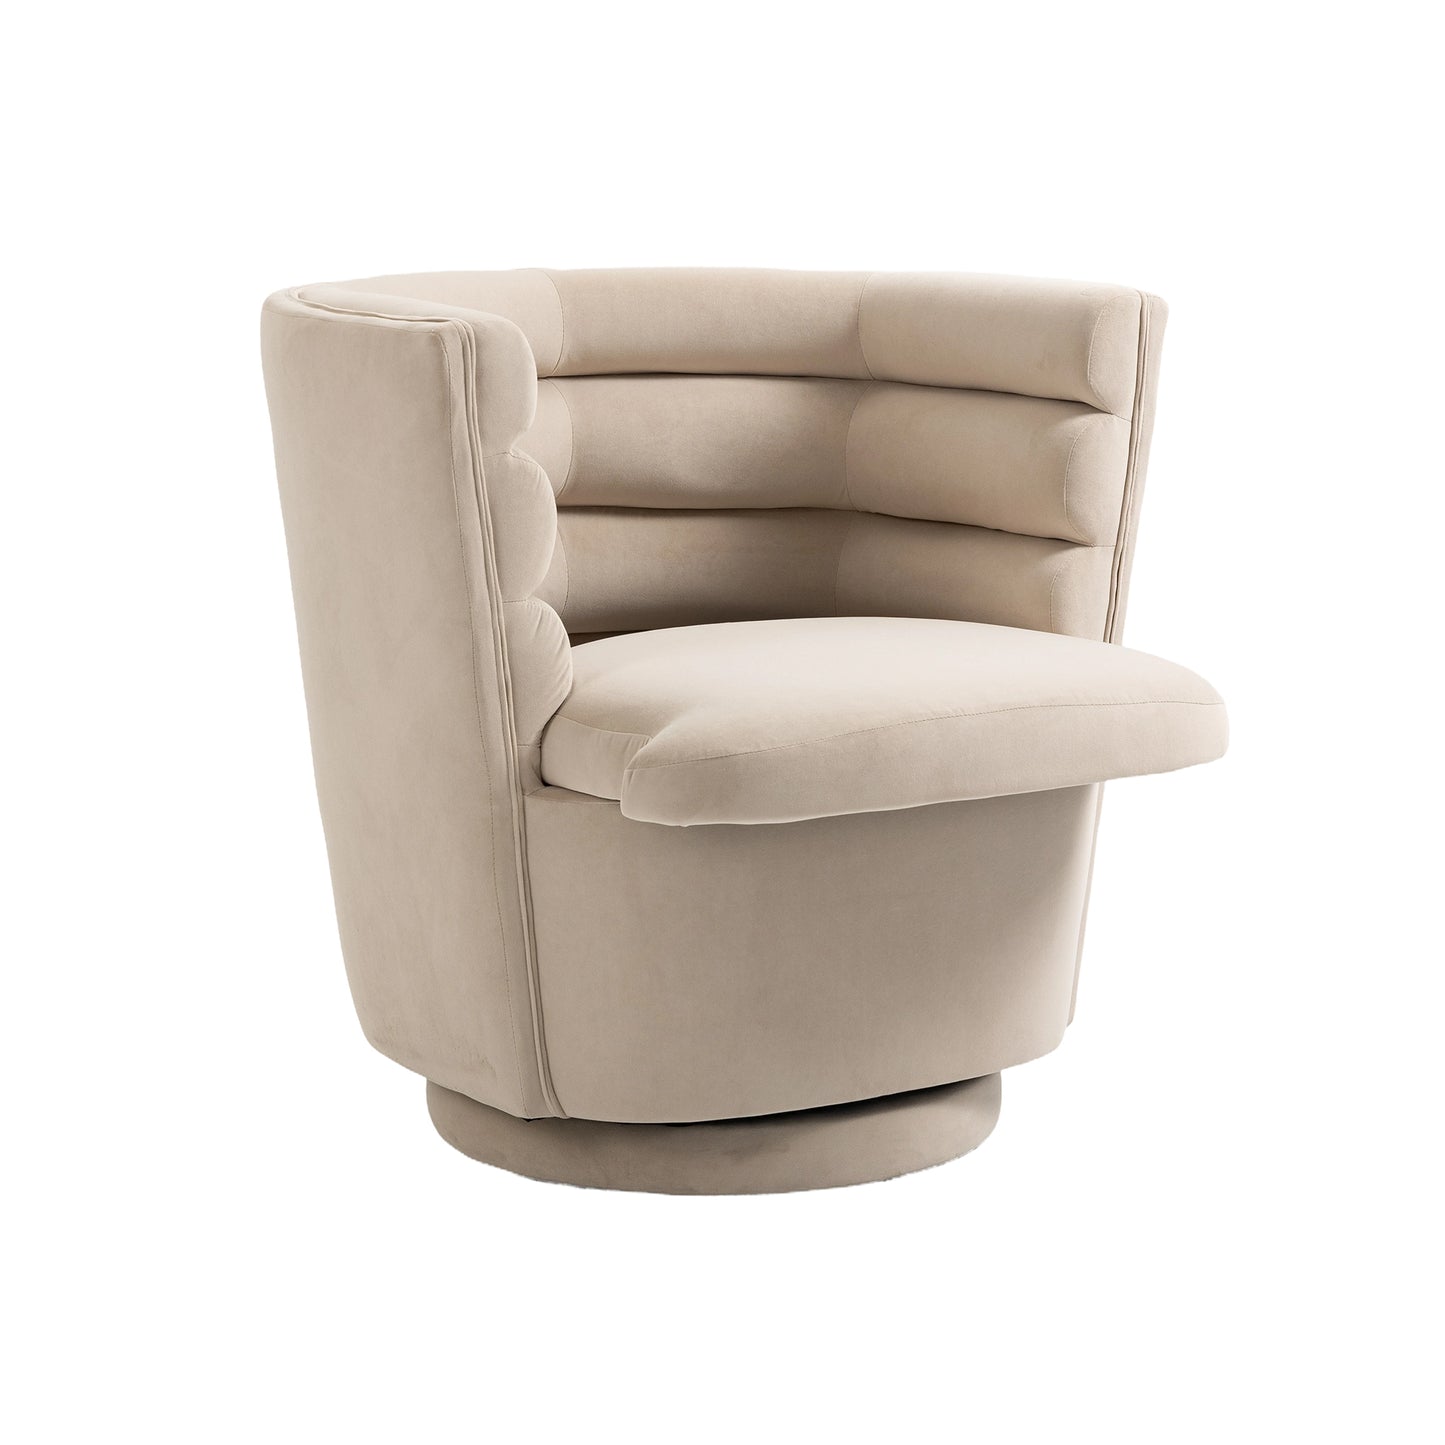 COOLMORE Swivel Barrel Chair, Comfy Round Accent  Chair with storage for Living Room, 360 Degree Swivel Barrel Club Chair, Leisure Arm Chair for Nursery, Hotel, Bedroom, Office - Enova Luxe Home Store